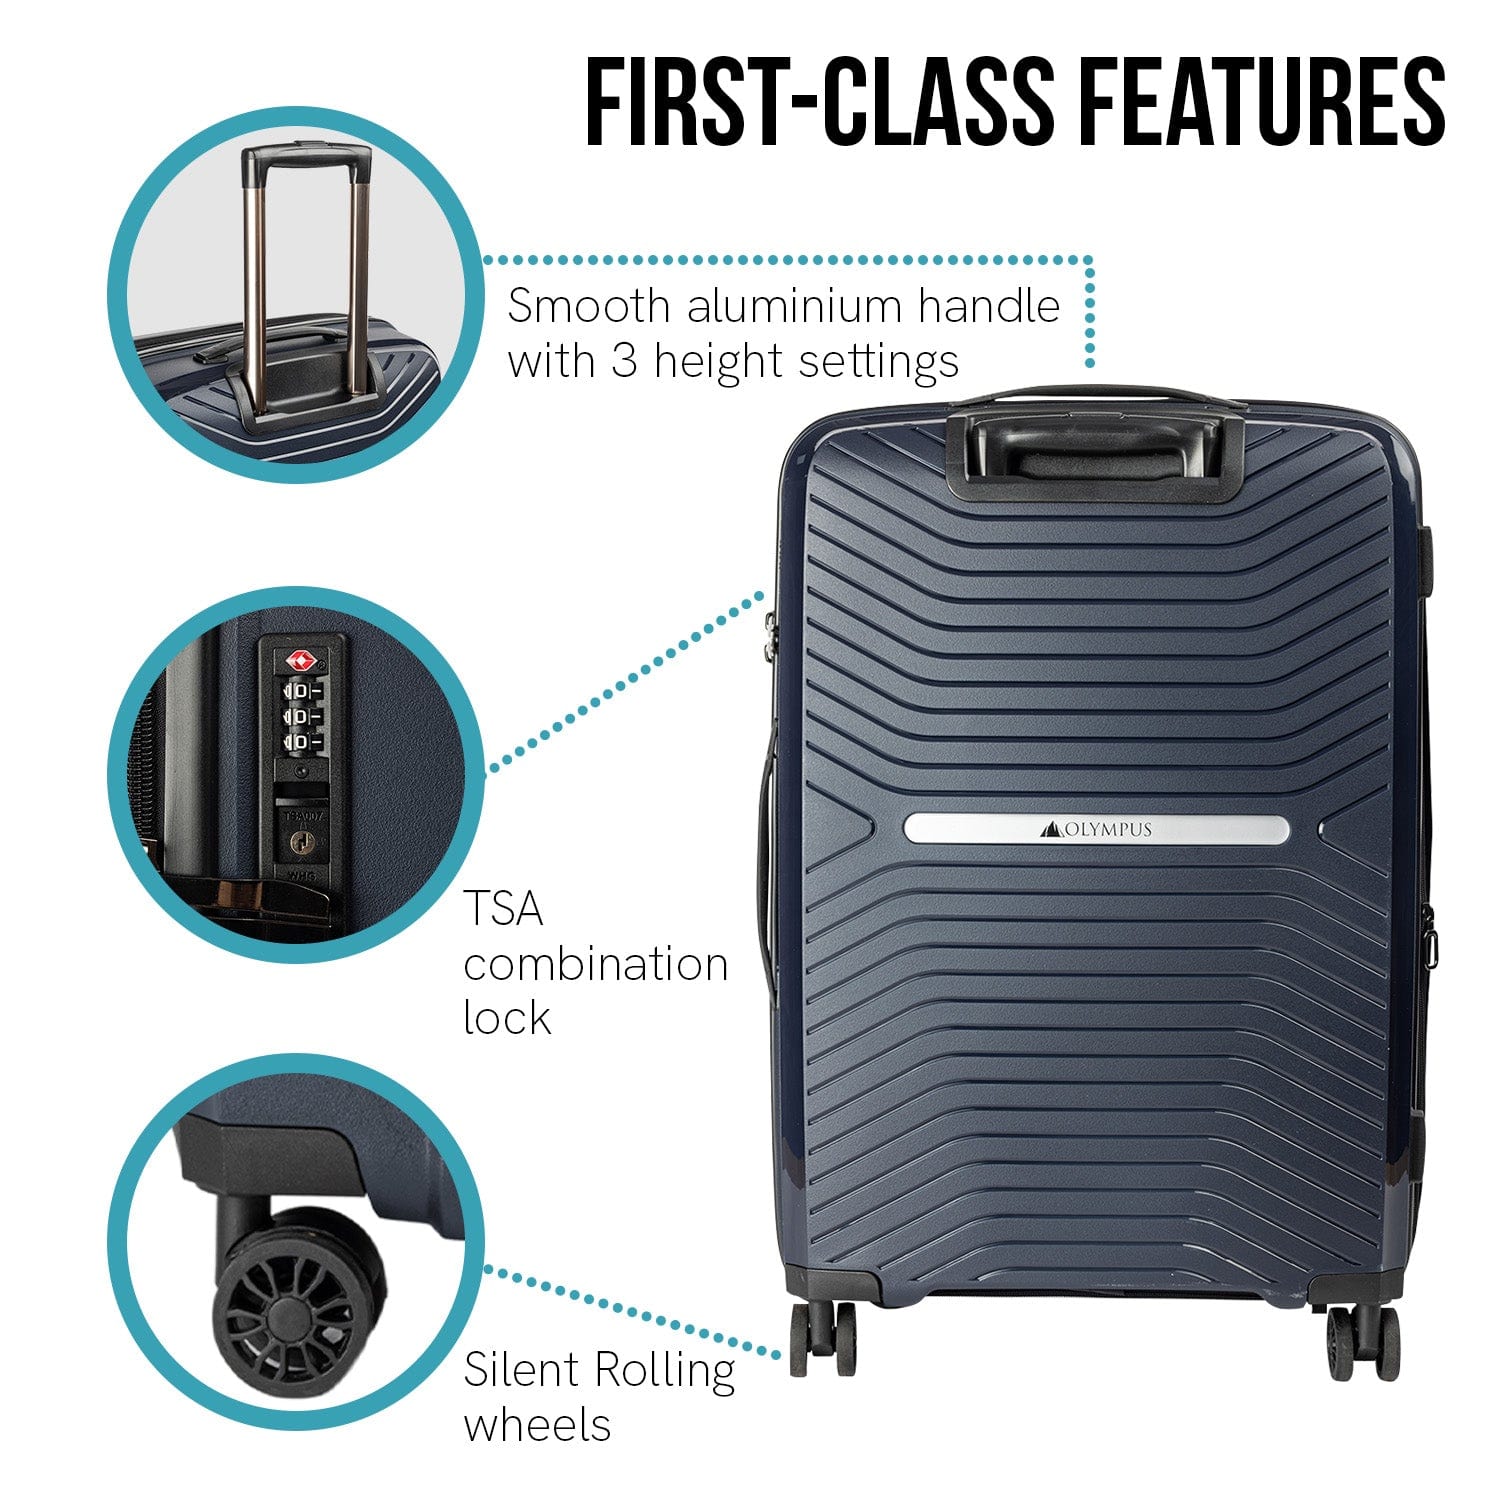 Astra 20in Lightweight Hard Shell Suitcase - Aegean Blue